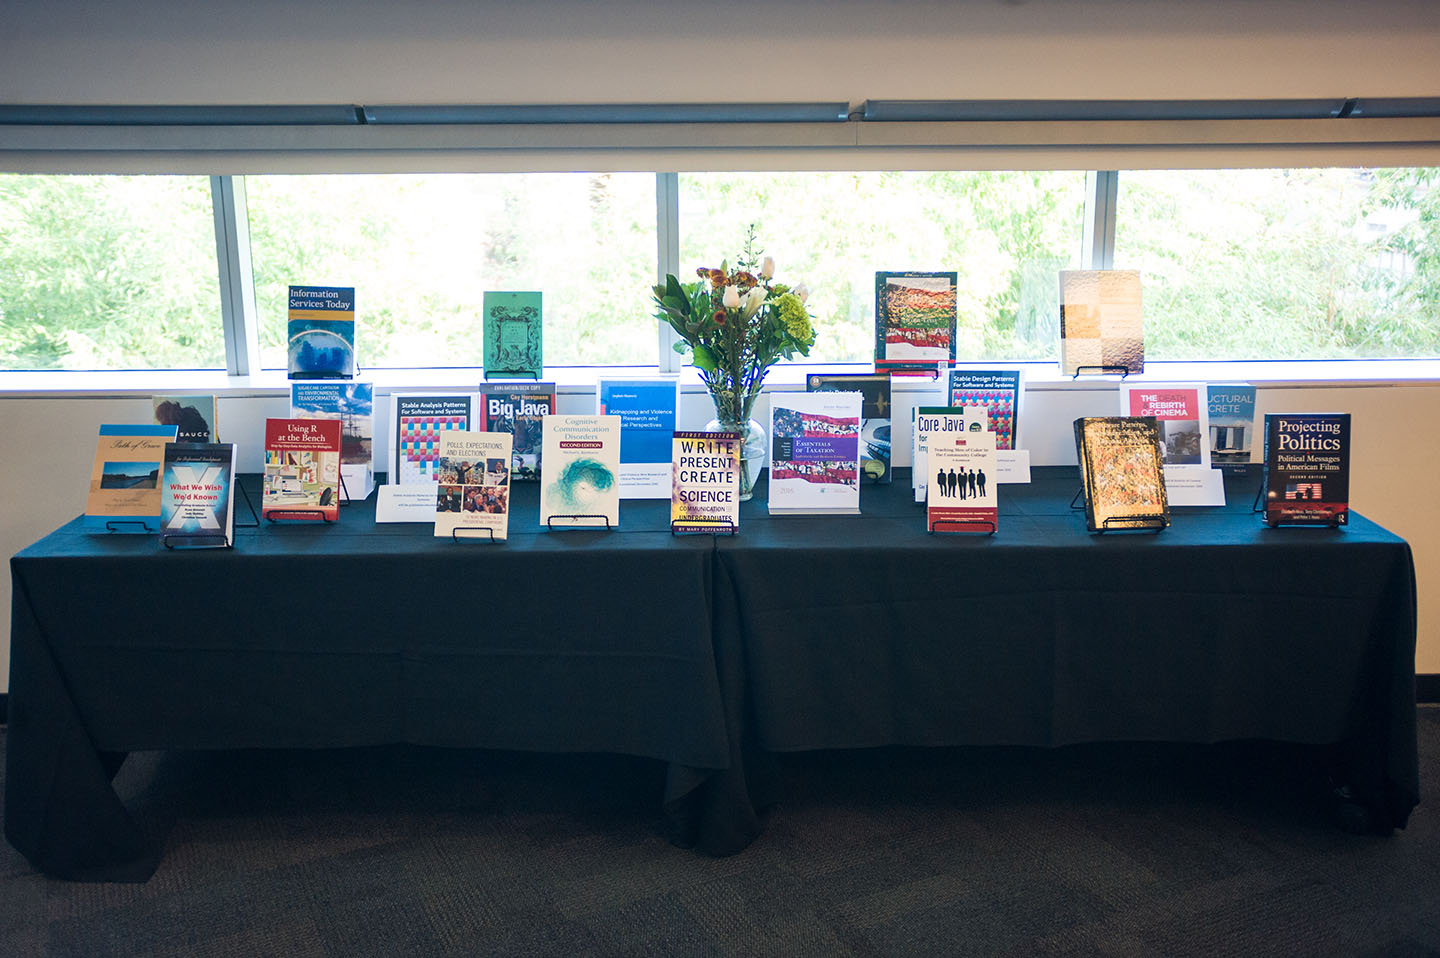 Books written or edited by SJSU faculty members were displayed at the Annual Author Awards in October.